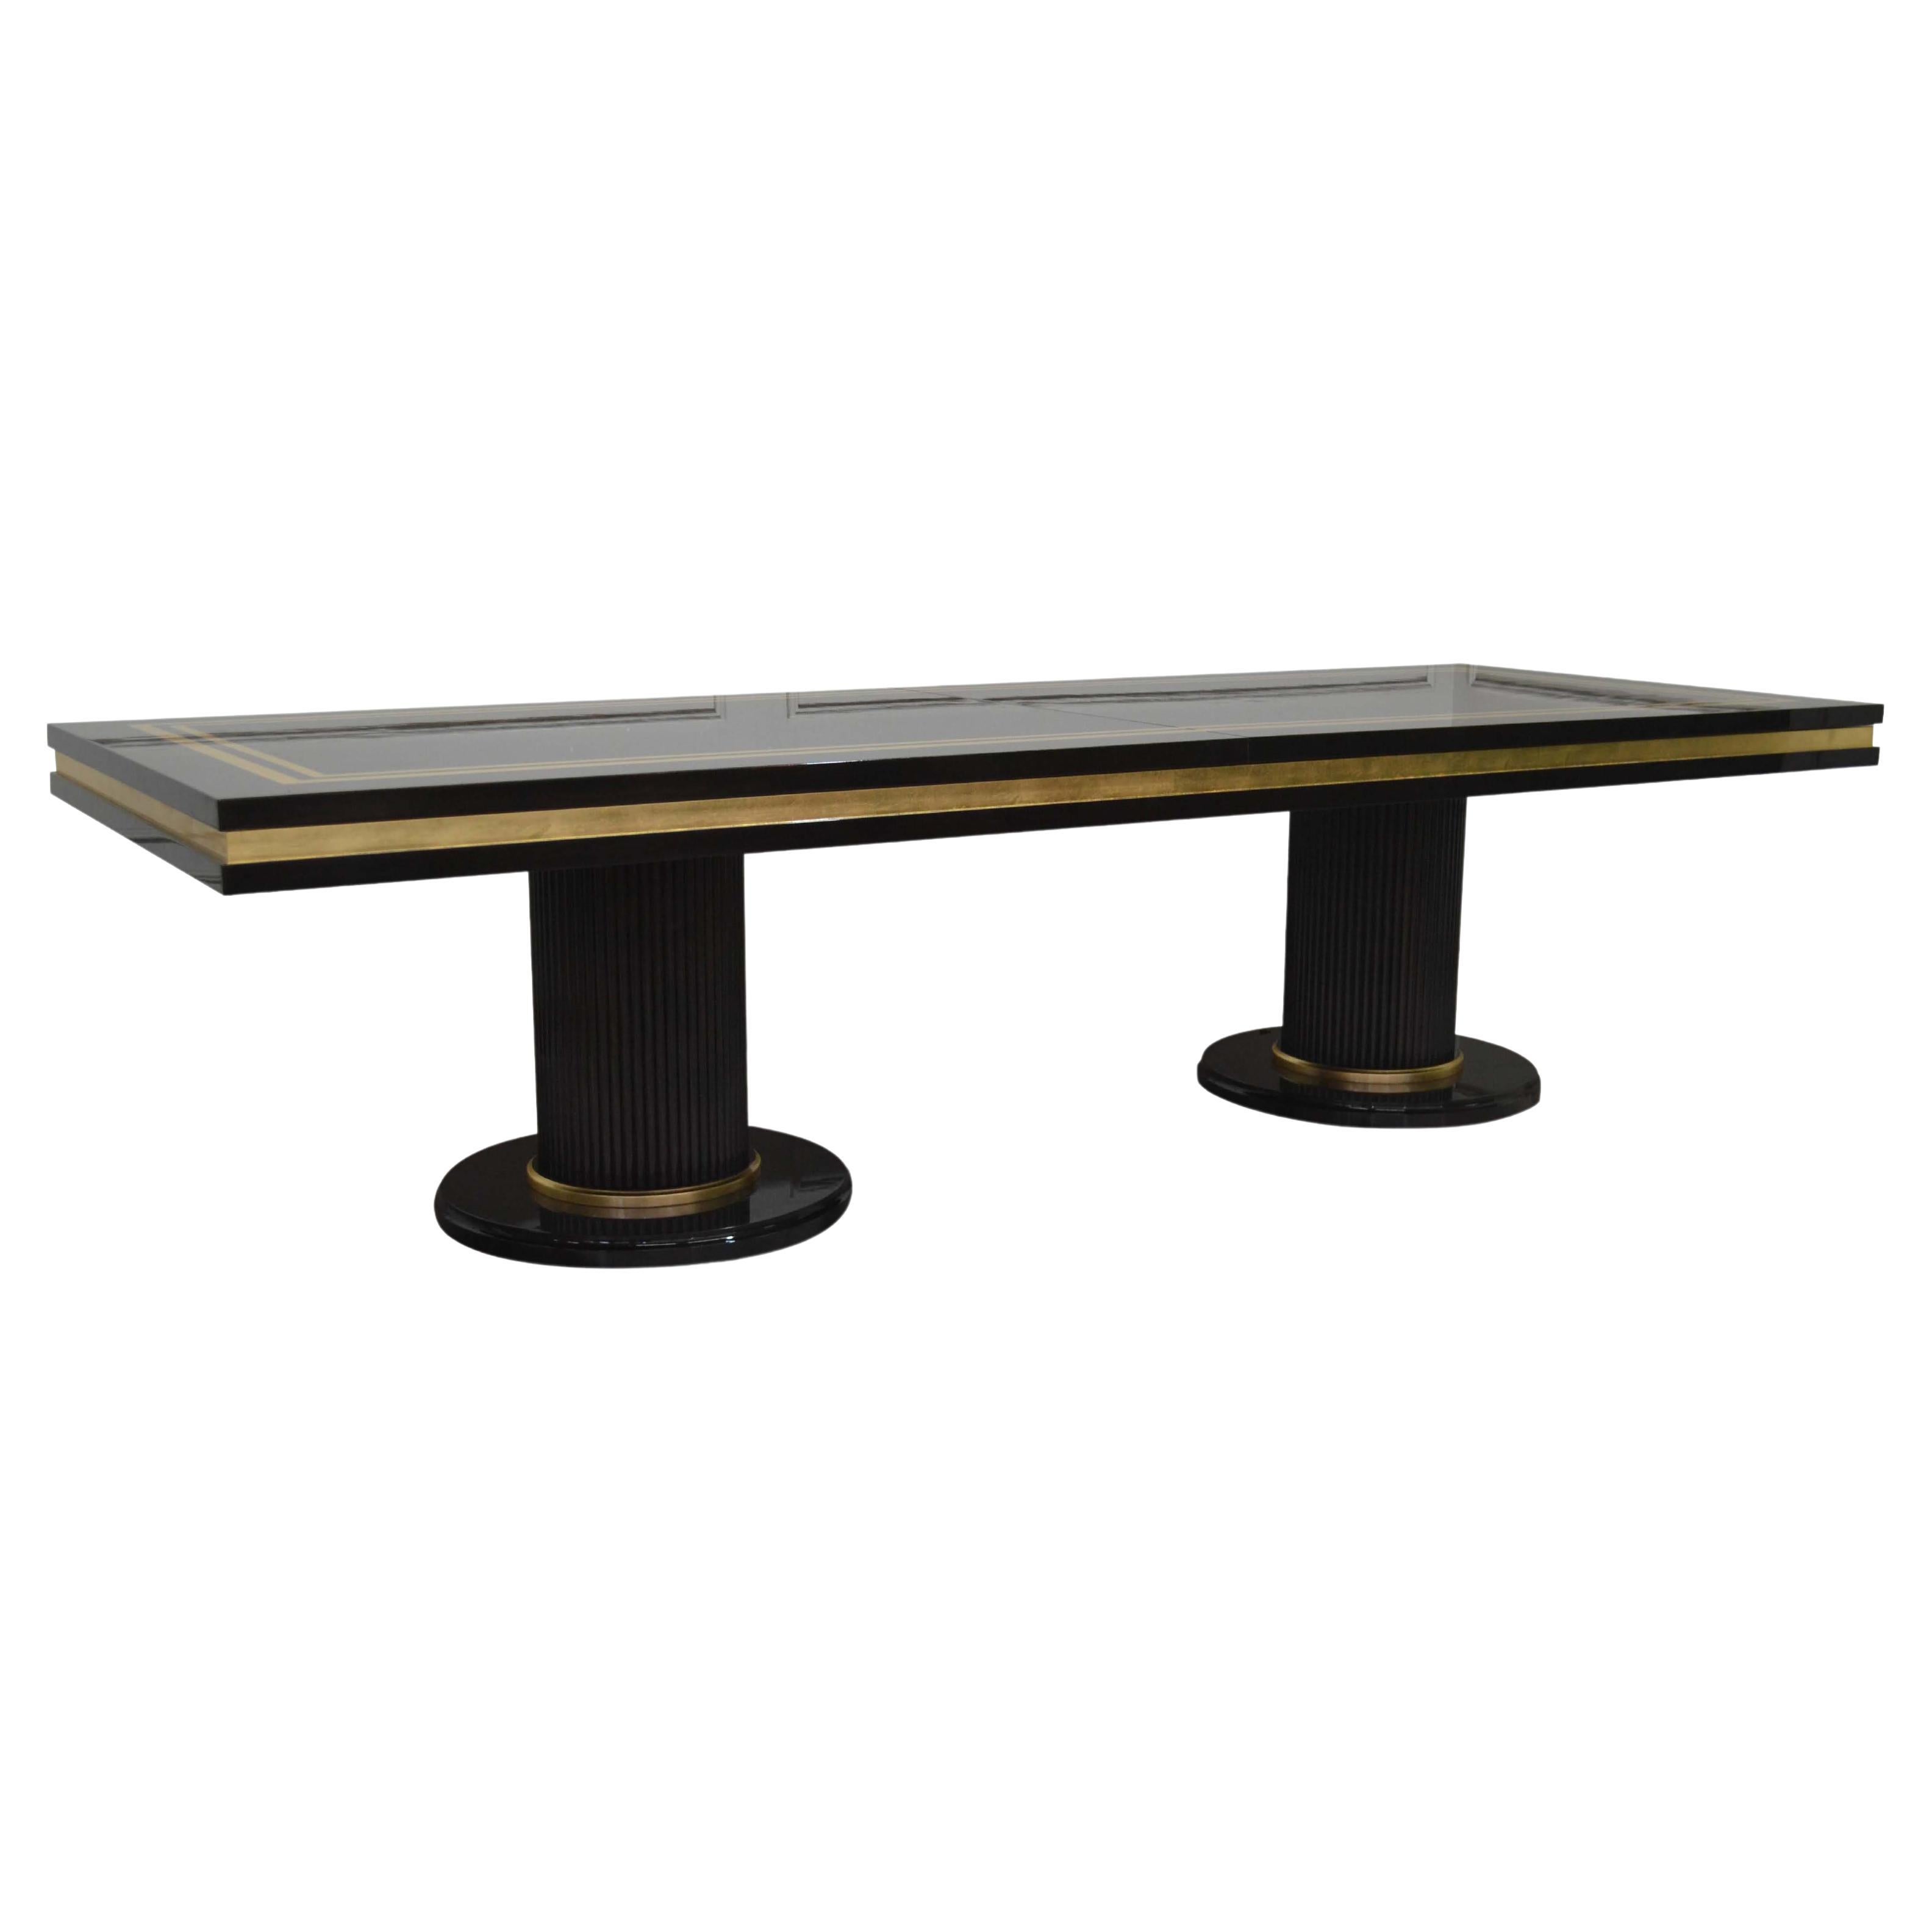 Art Deco Large Extendable Table, Lacquer, Italy